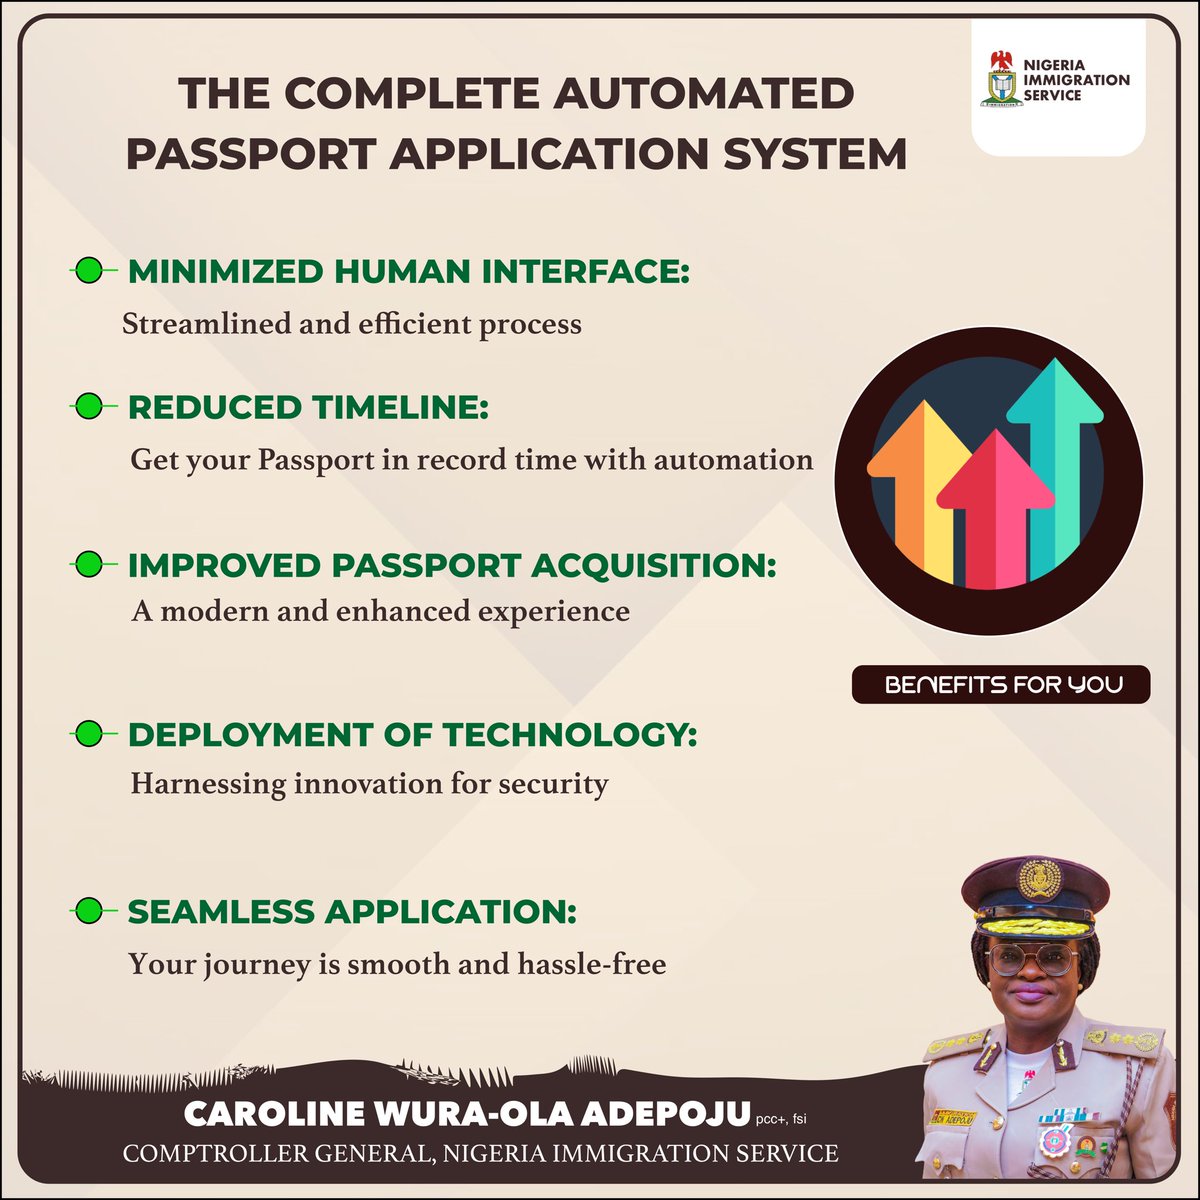 Nigeria Immigration Service introduces the Complete Automated Passport Application System 🤎 1/2